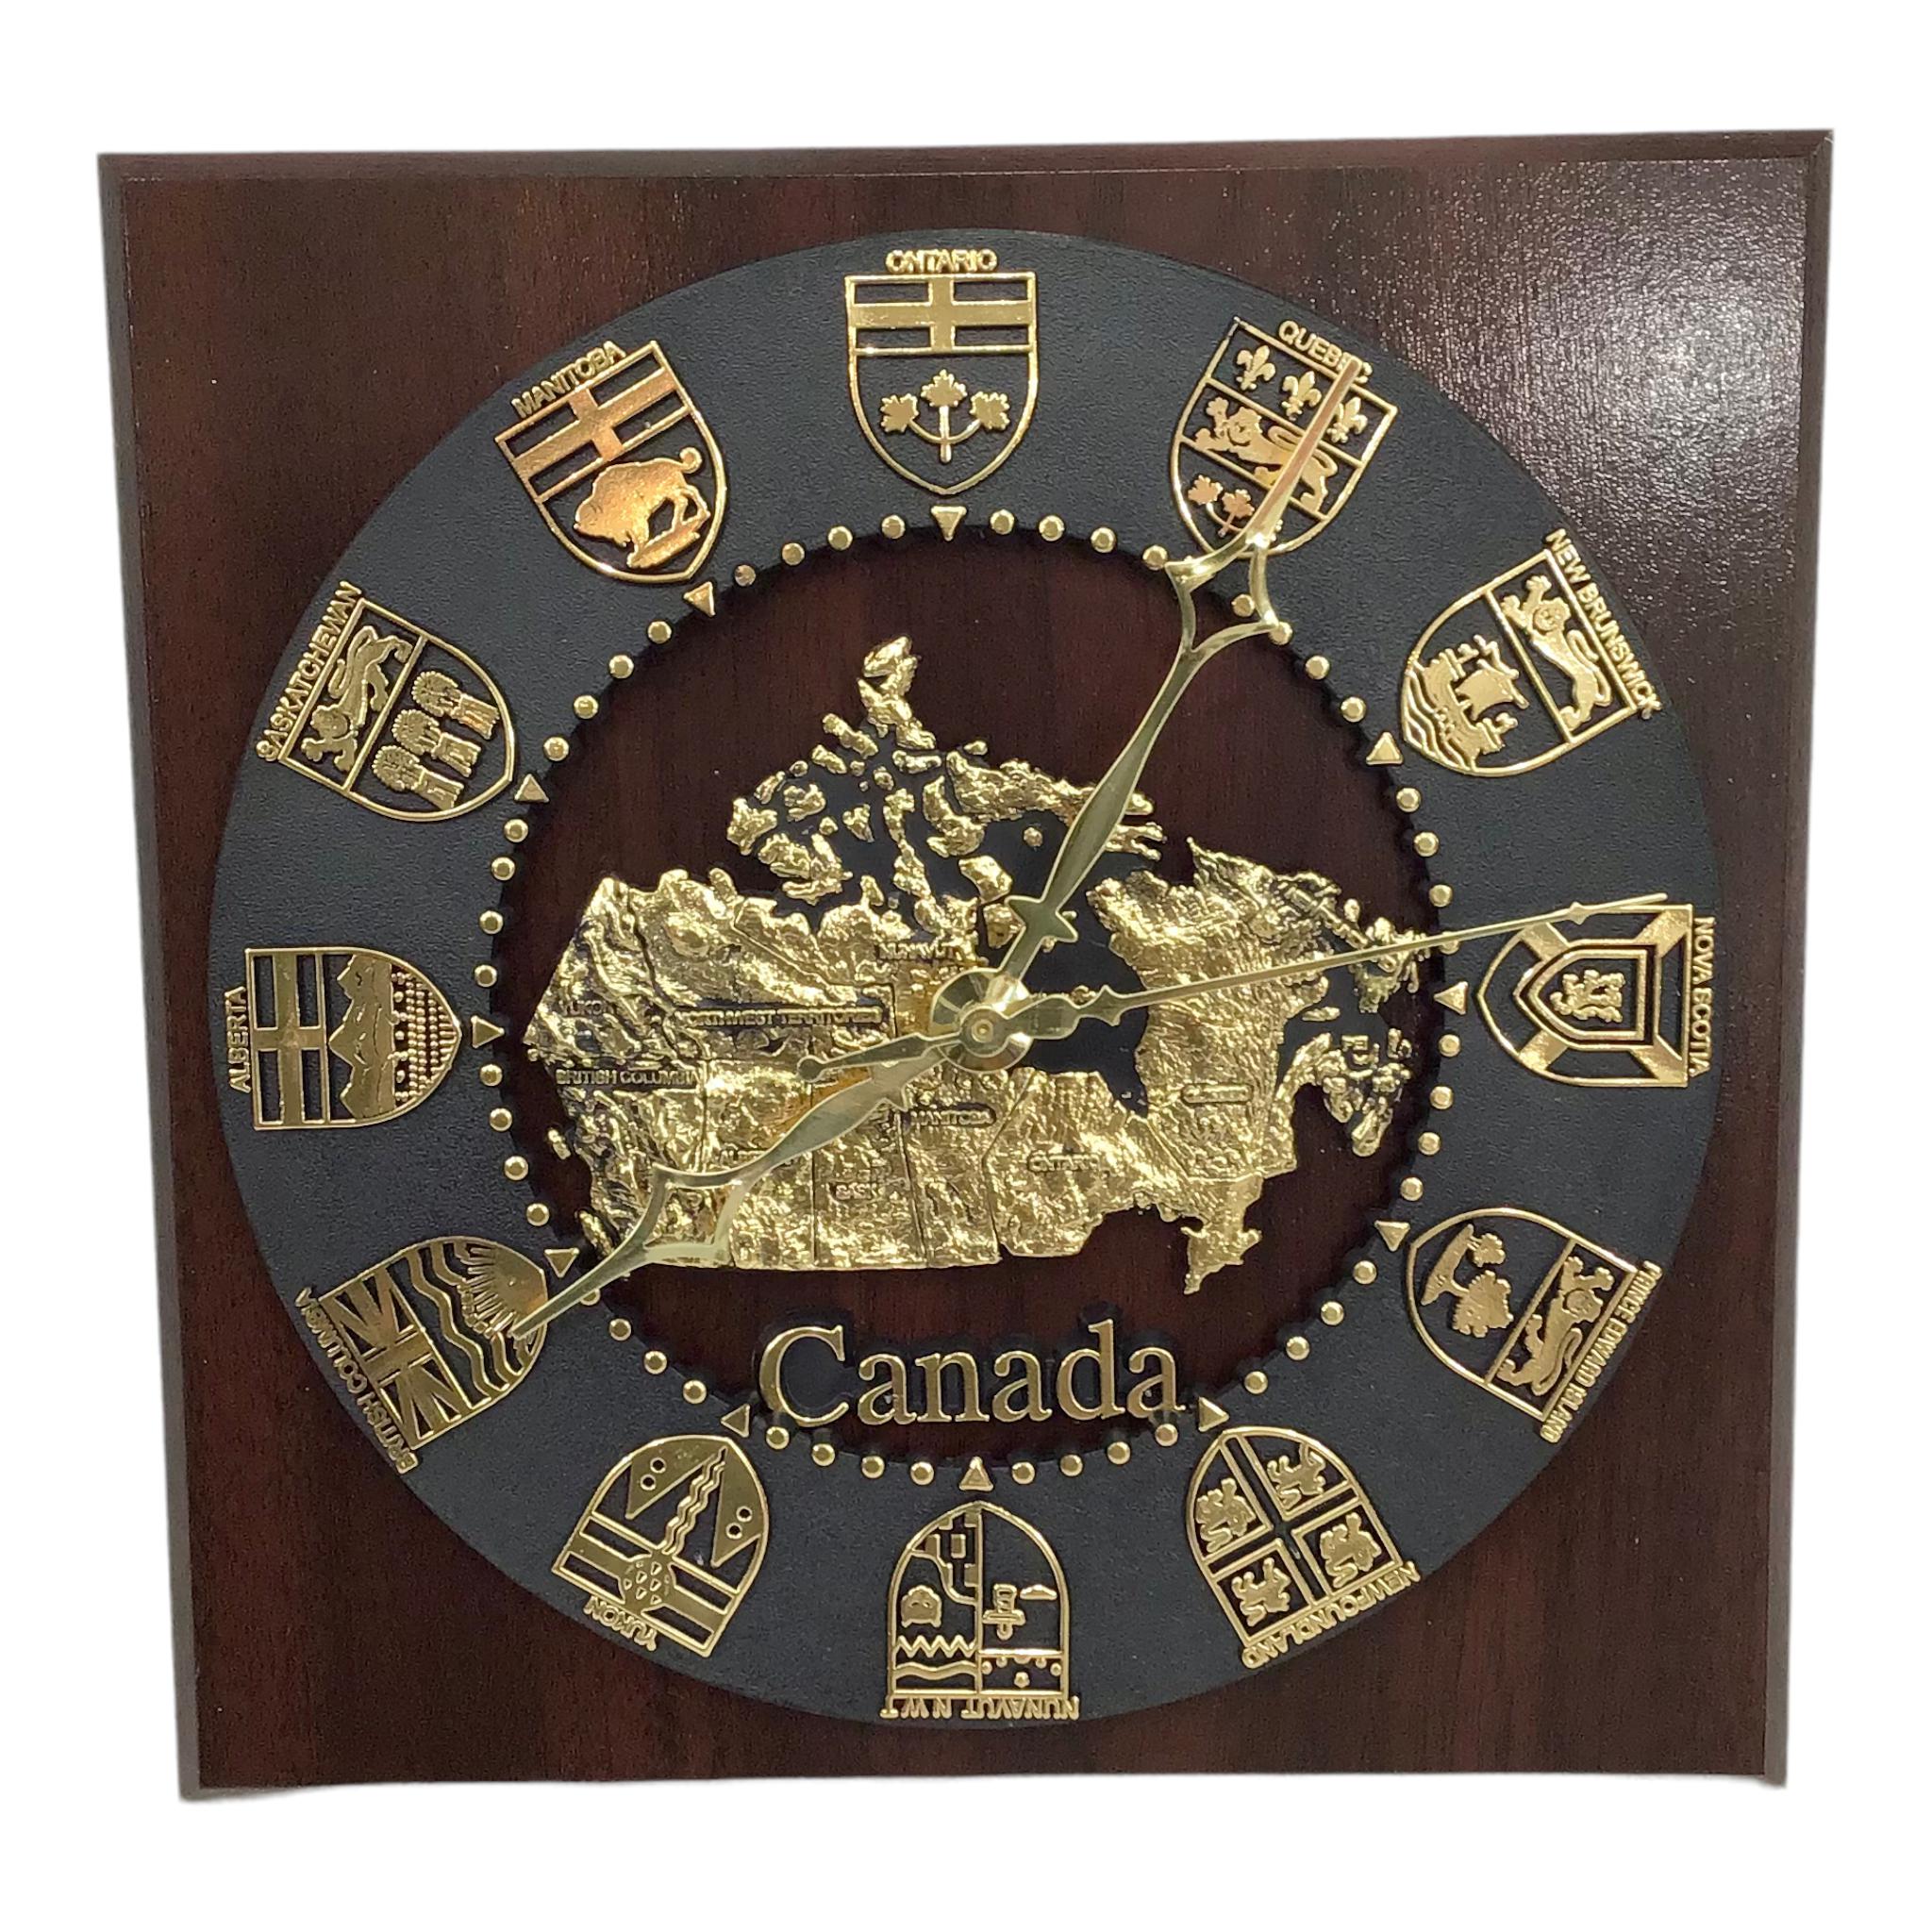 Made in Canada Wall Clock - Canada Map w/ Canadian Provincial Crests of each Province and Territory in Canada Surrounding the Center Map